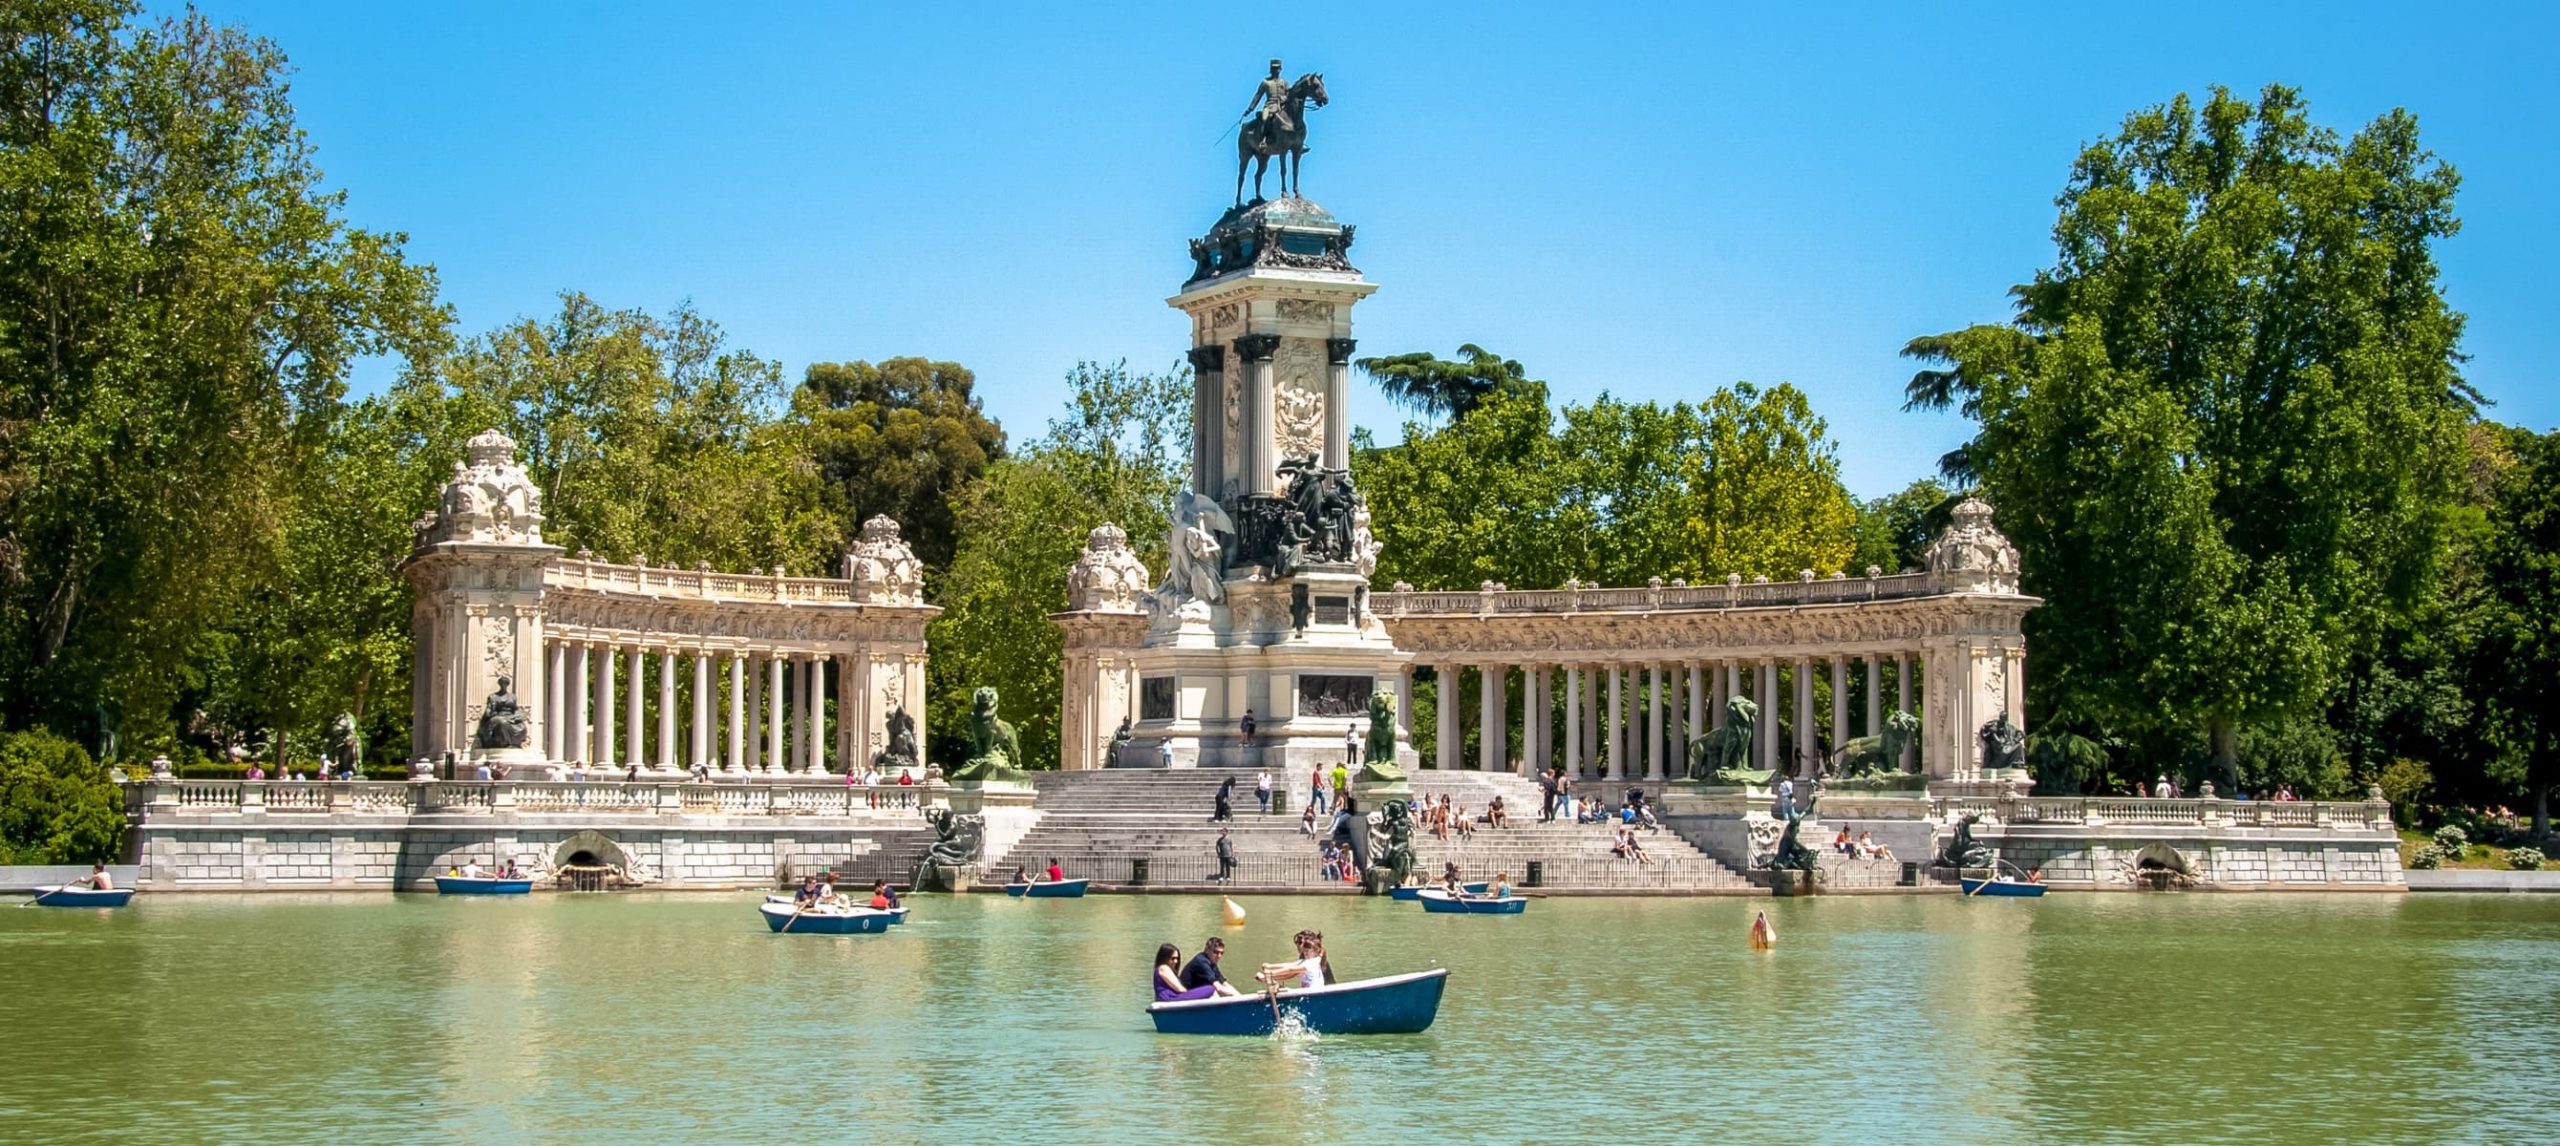 13 Amazing Free Things To Do In Madrid, Spain